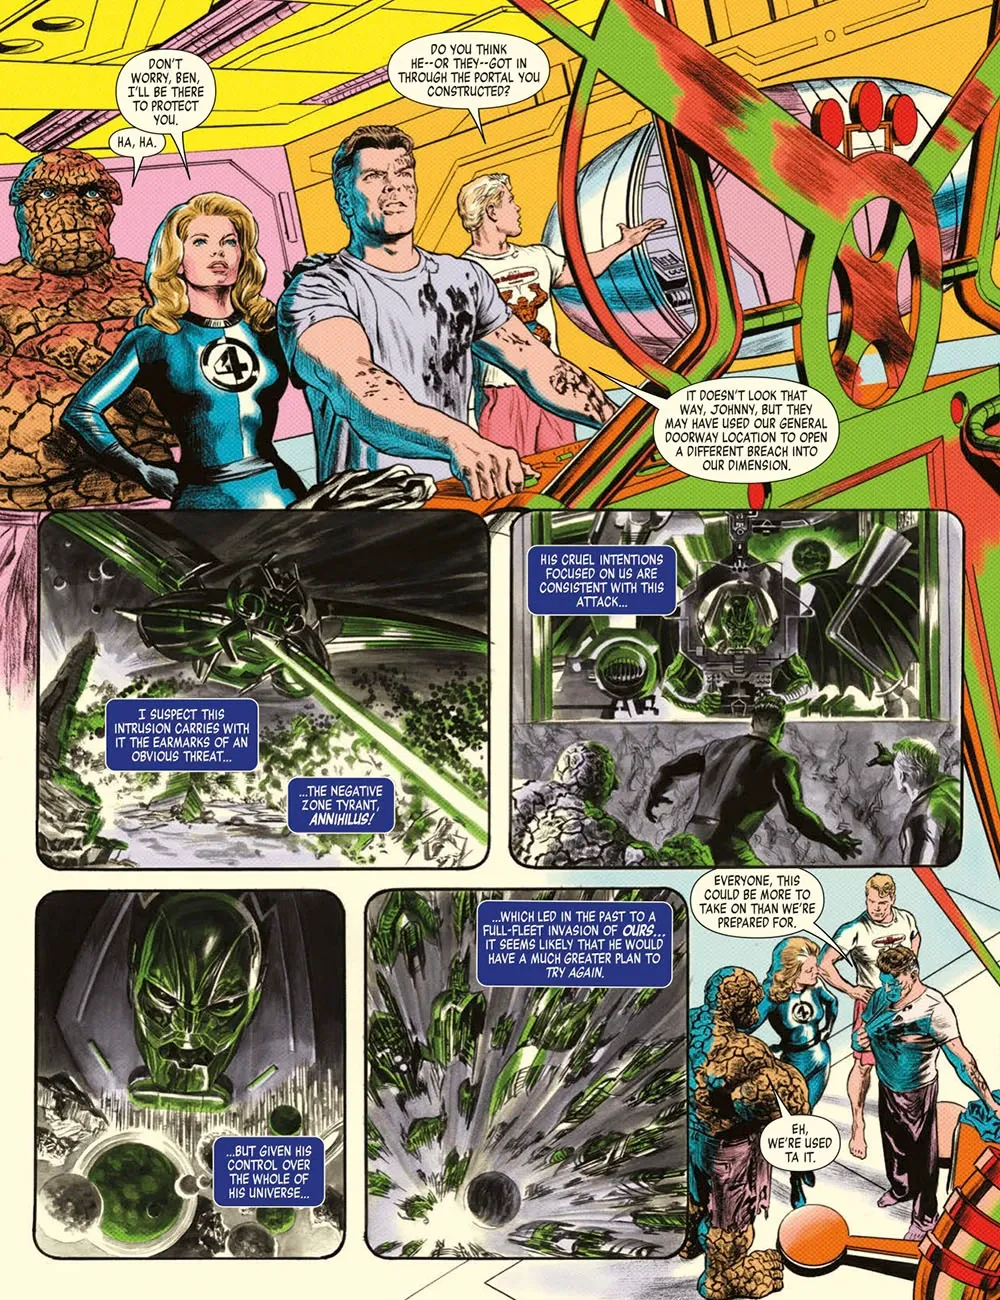 Alex Ross Debuts Dramatically Different Art Style for Fantastic Four Graphic Novel